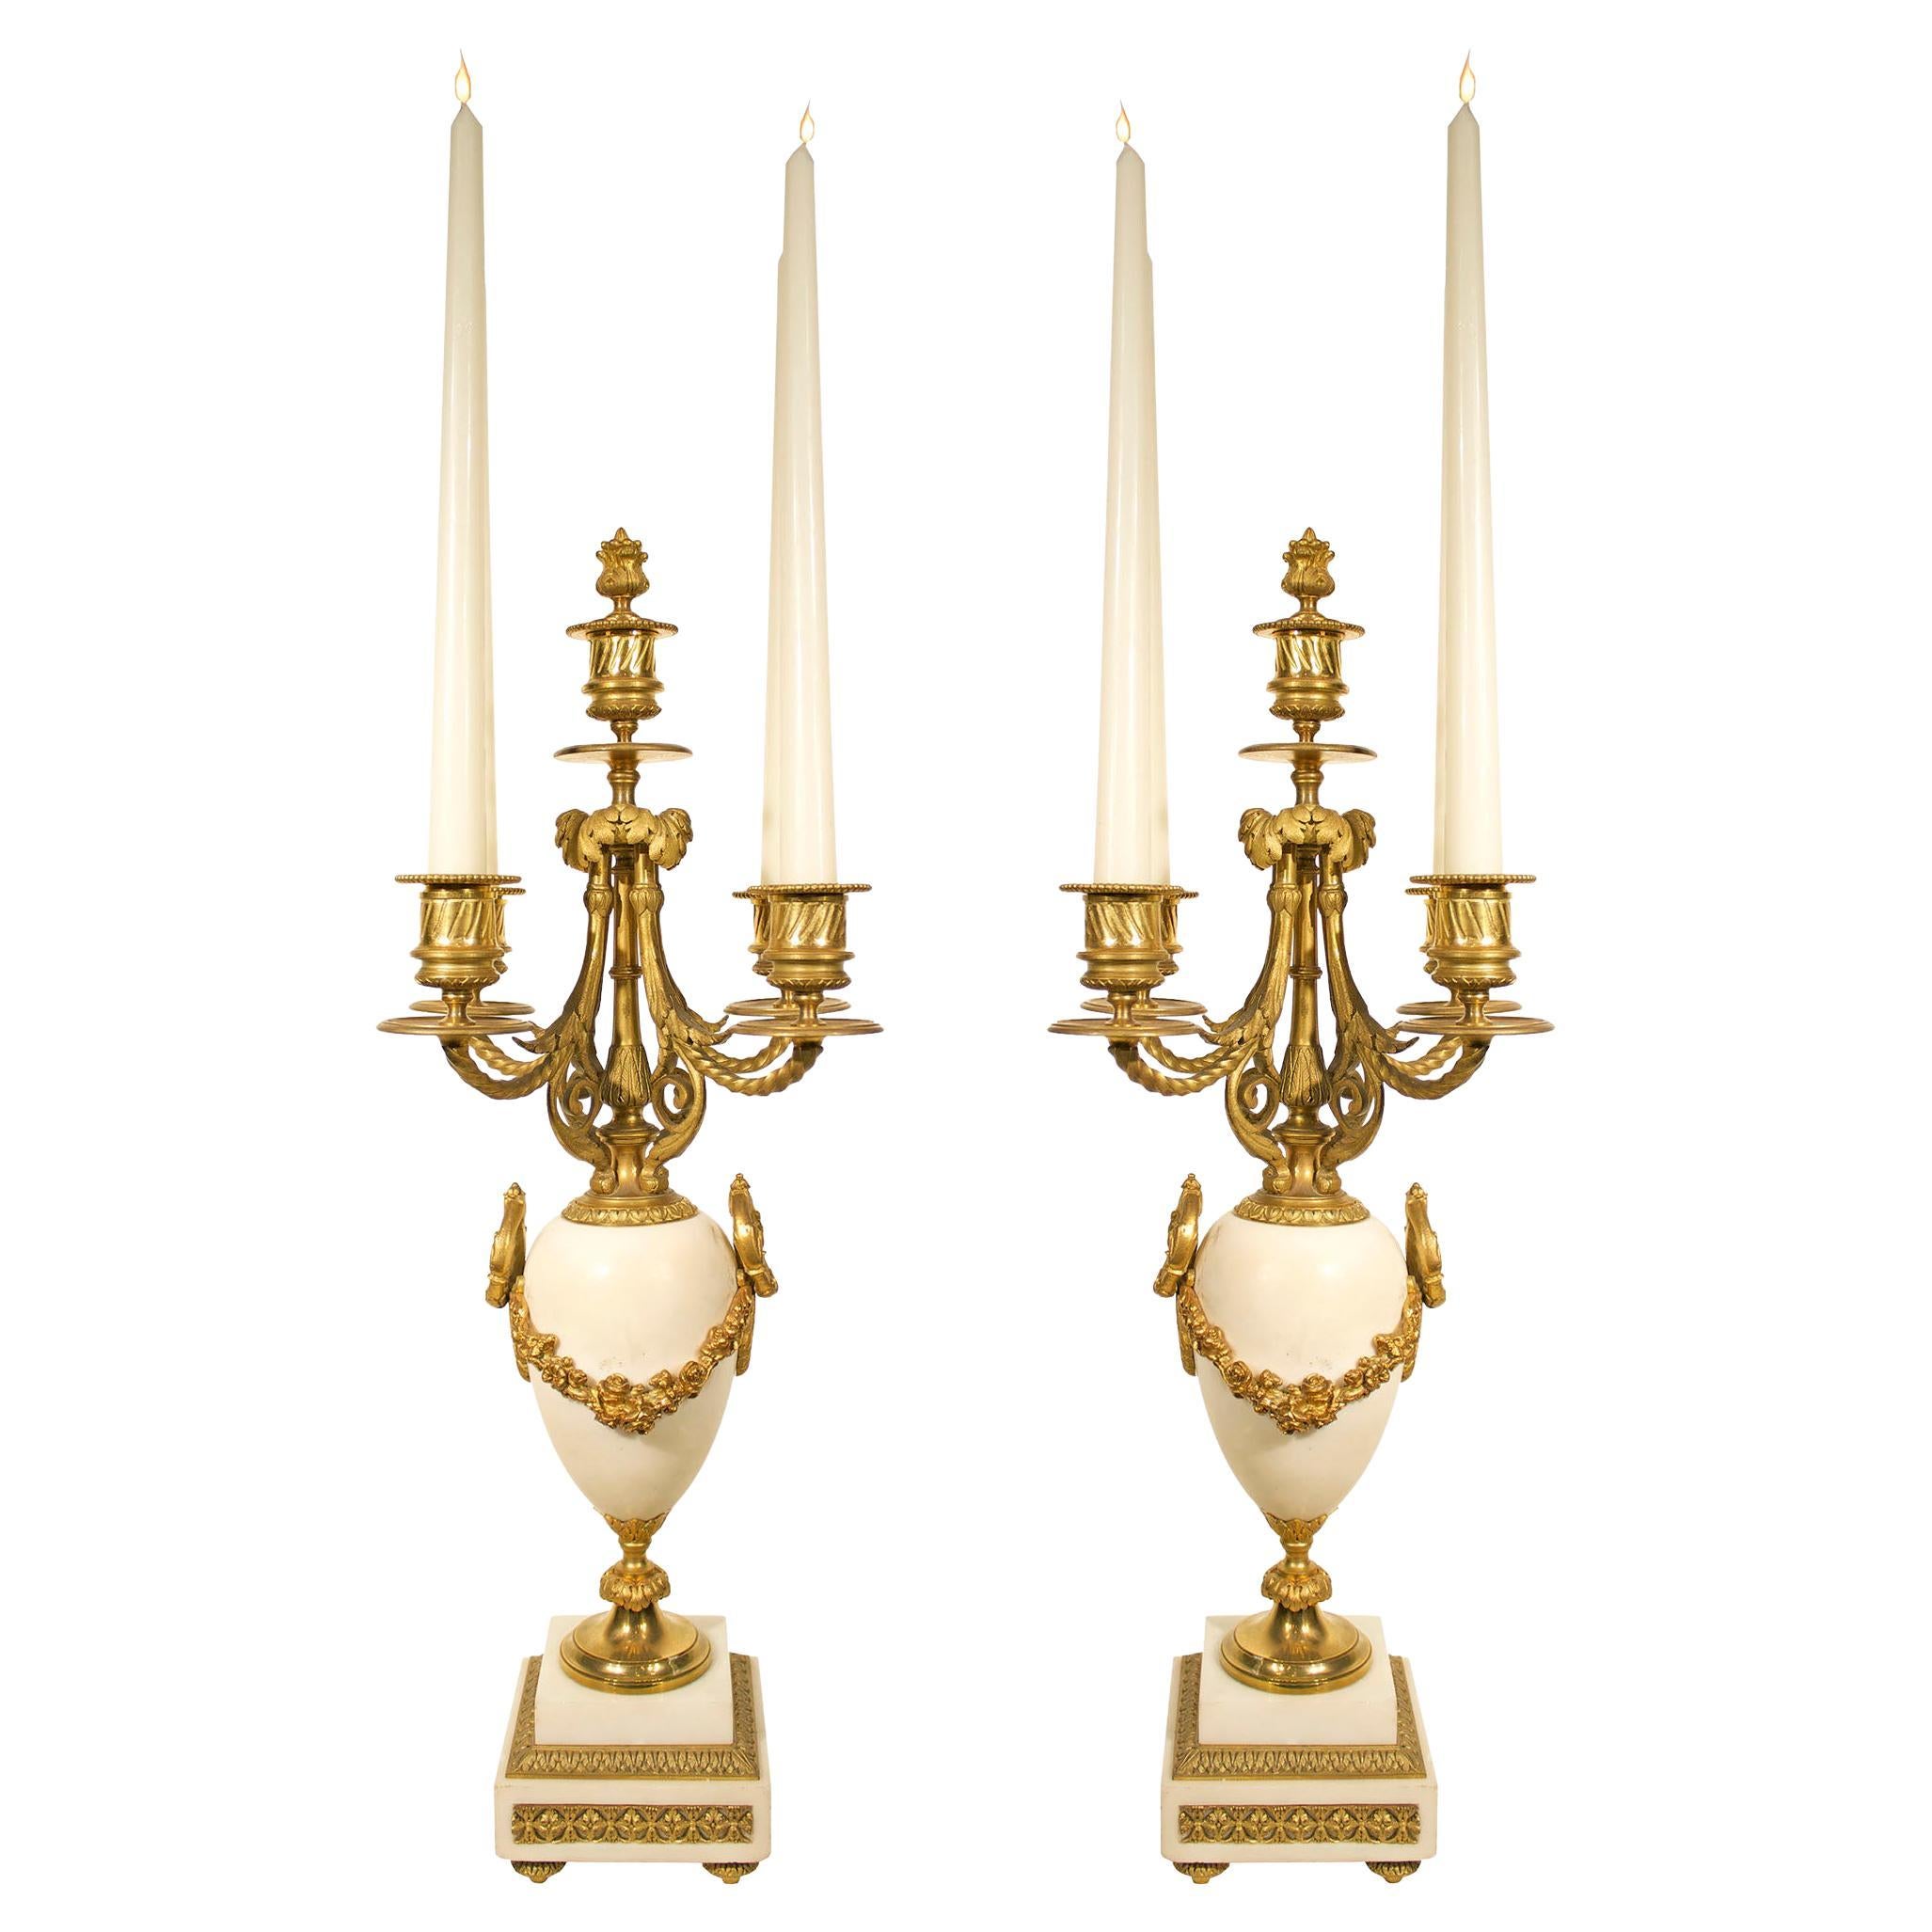 Pair of French Mid-19th Century Louis XVI Style Marble and Ormolu Candelabras For Sale